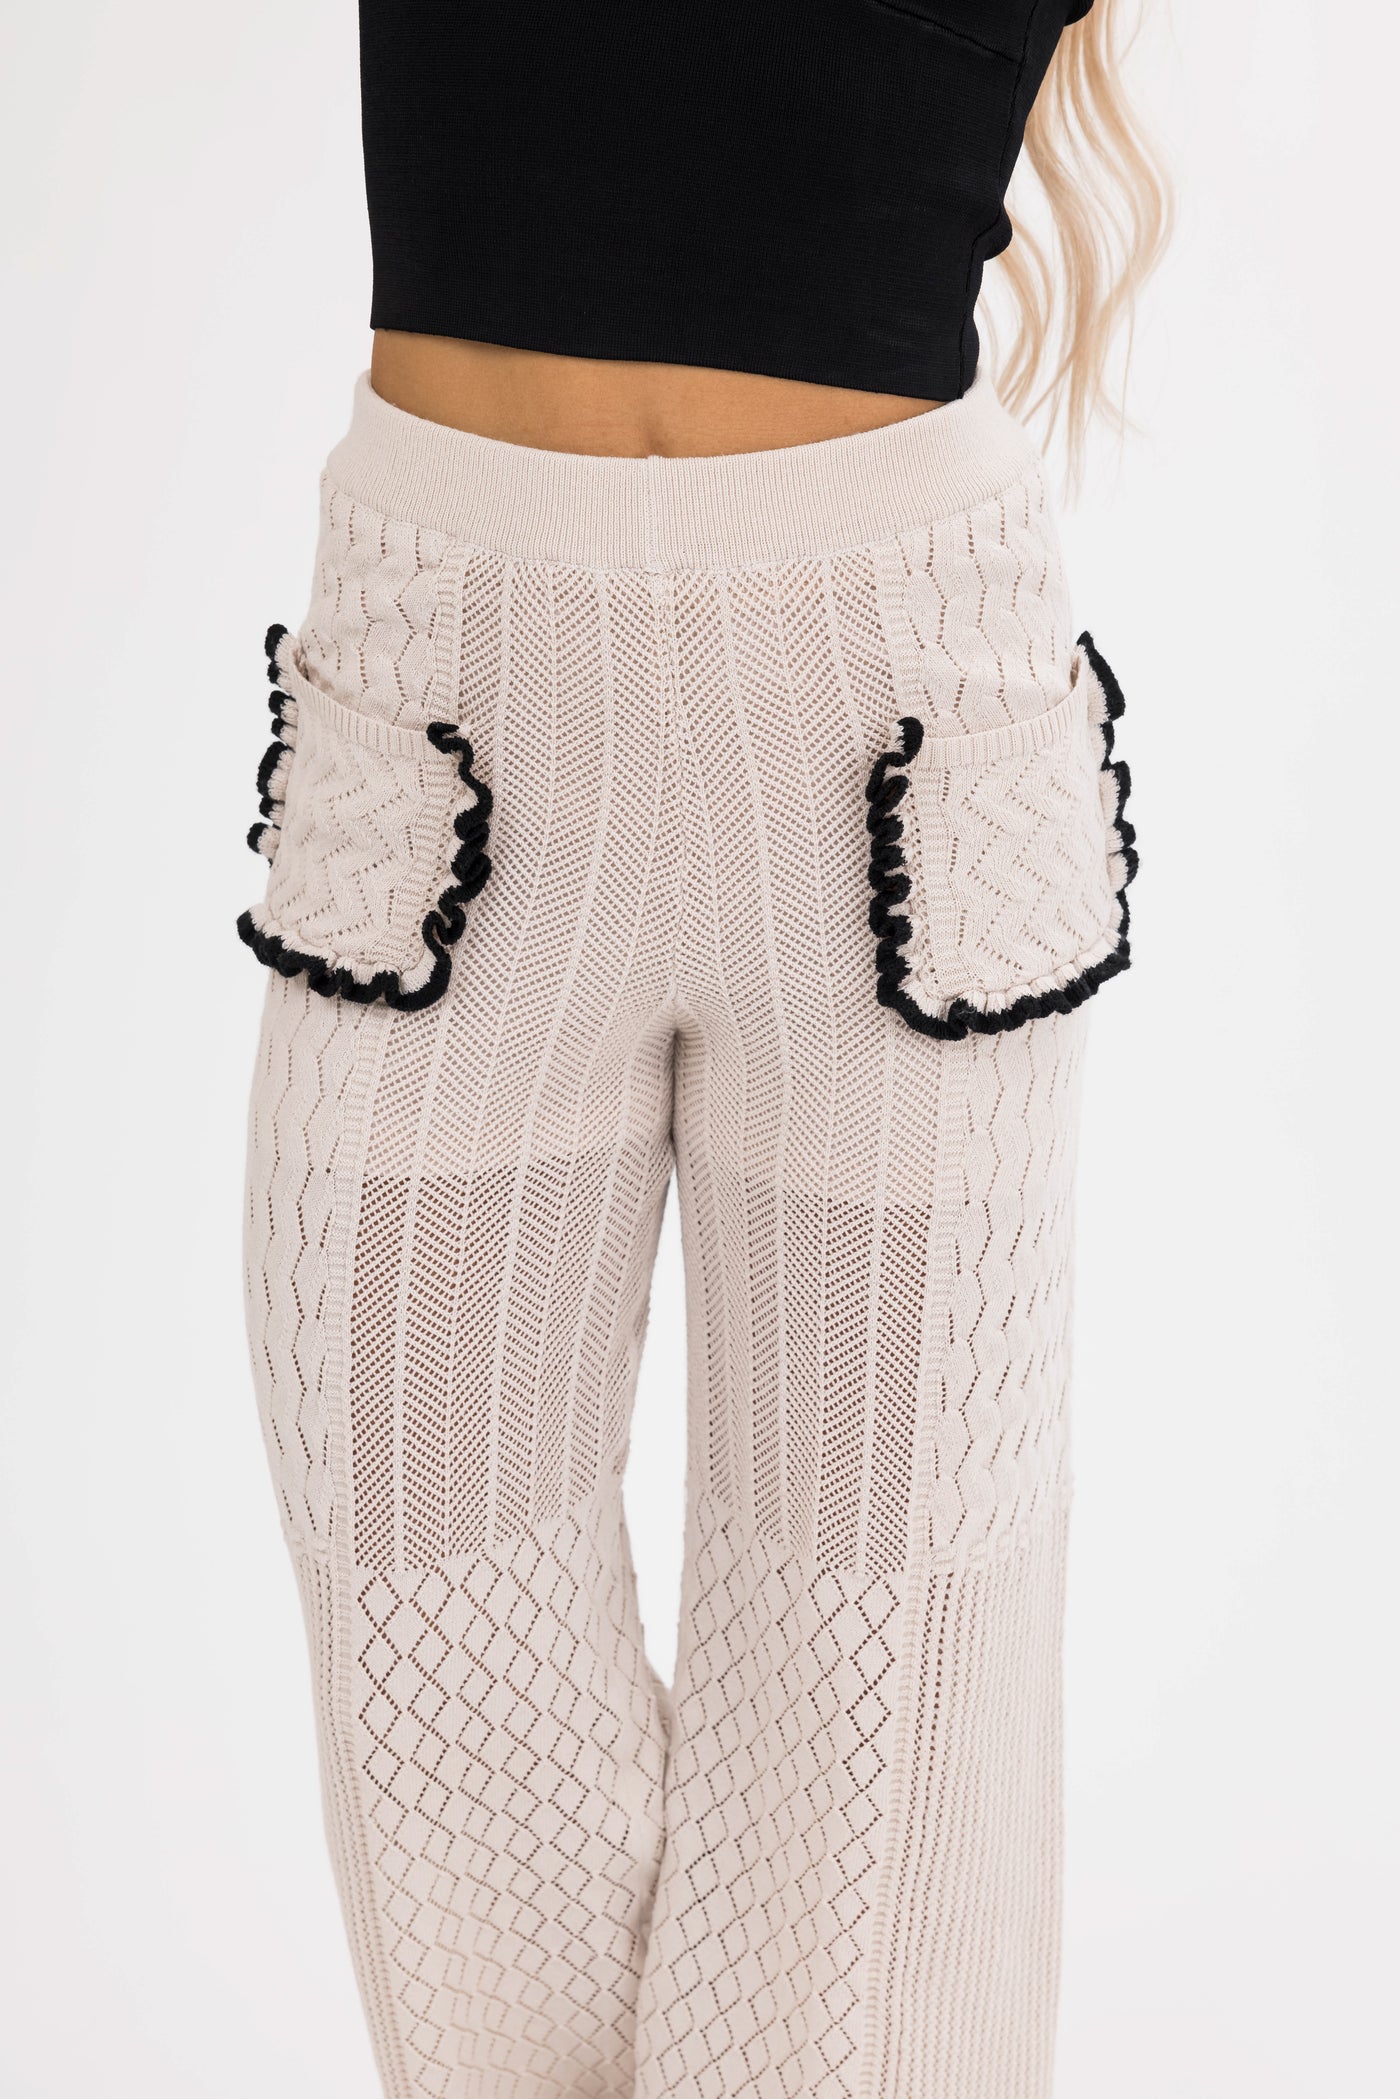 Coconut Textured Straight Leg Pants with Contrast Trim